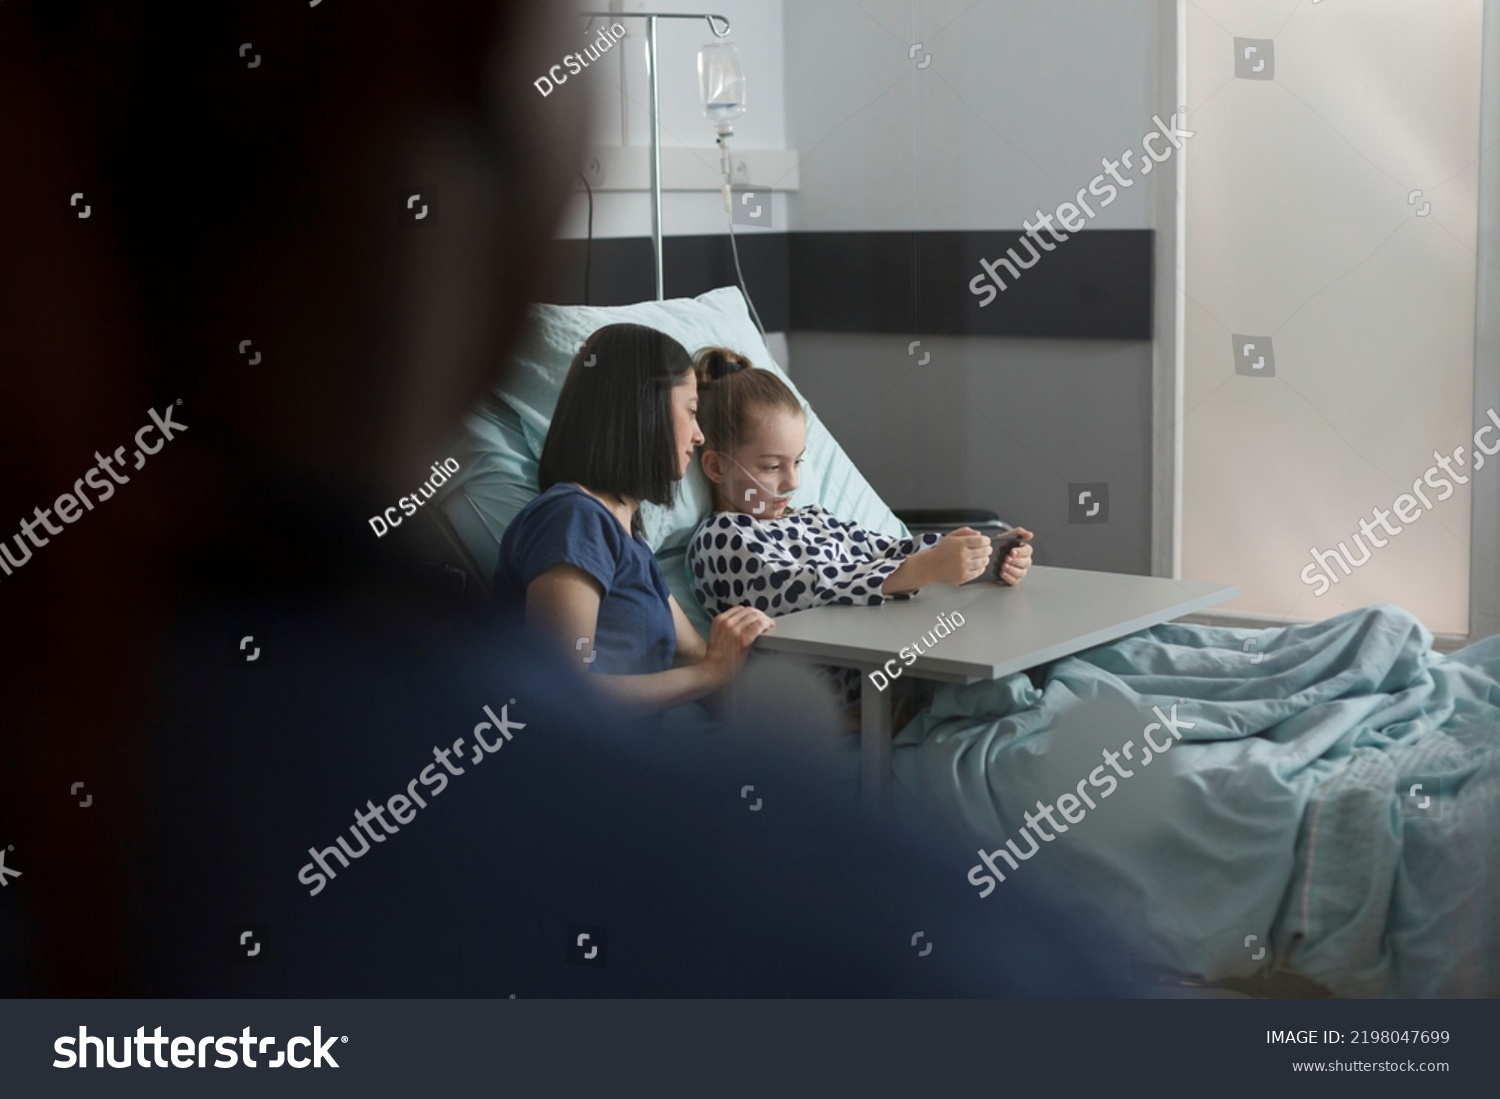 Caring parent sitting beside hospitalized sick daughter watching cartoons on smartphone. Ill little girl playing games on mobile phone while resting in hospital pediatrics ward patient bed. #2198047699